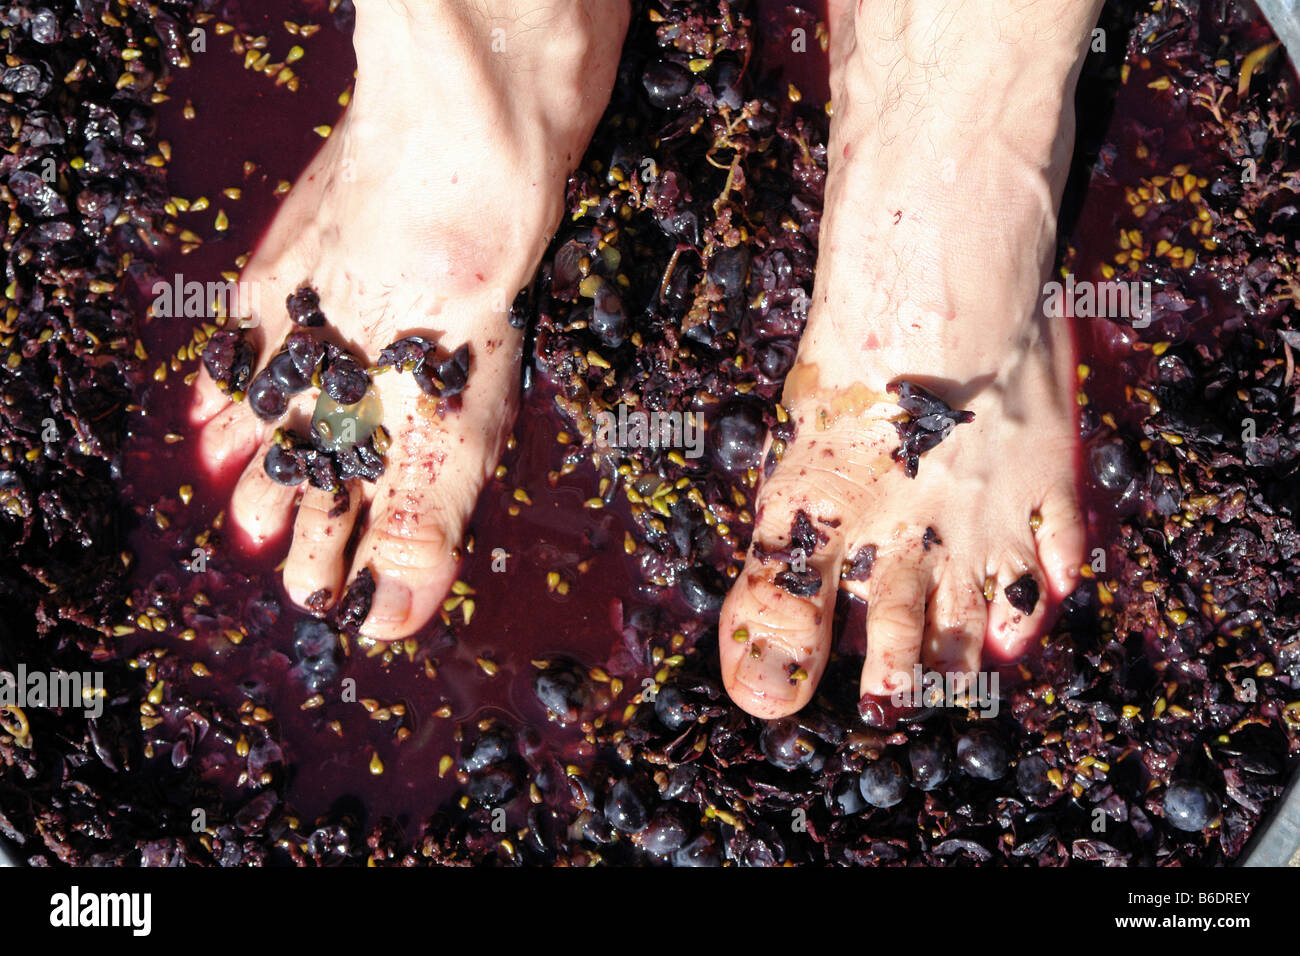 Feet of a Man Stomping Squeezing Red Purple Grapes in the Traditional Wine Making Process Copy Space Stock Photo